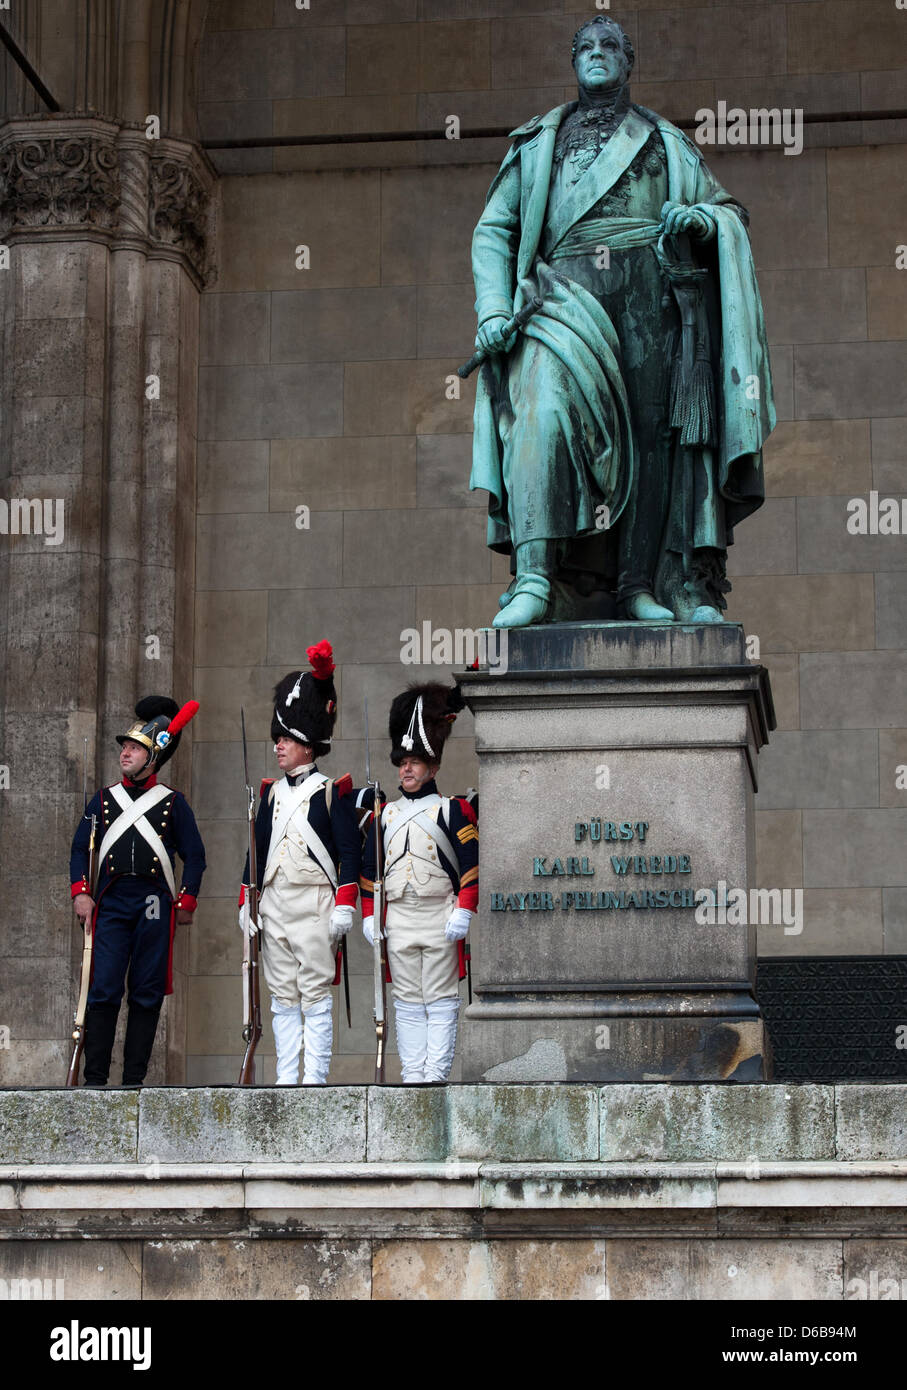 Three men wearing historical military uniforms stand next to a memorial of Bavarian field-marshal Karl Philipp von Wrede at the monumental loggia Feldherrnhalle in Munich, Germany, 24 August 2012. The three men created a perfect atmosphere during a press event initiated for the presentation of a book on the historical topic 'Napoleon and field-Marshal Wrede'. Photo: PETER KNEFFEL Stock Photo